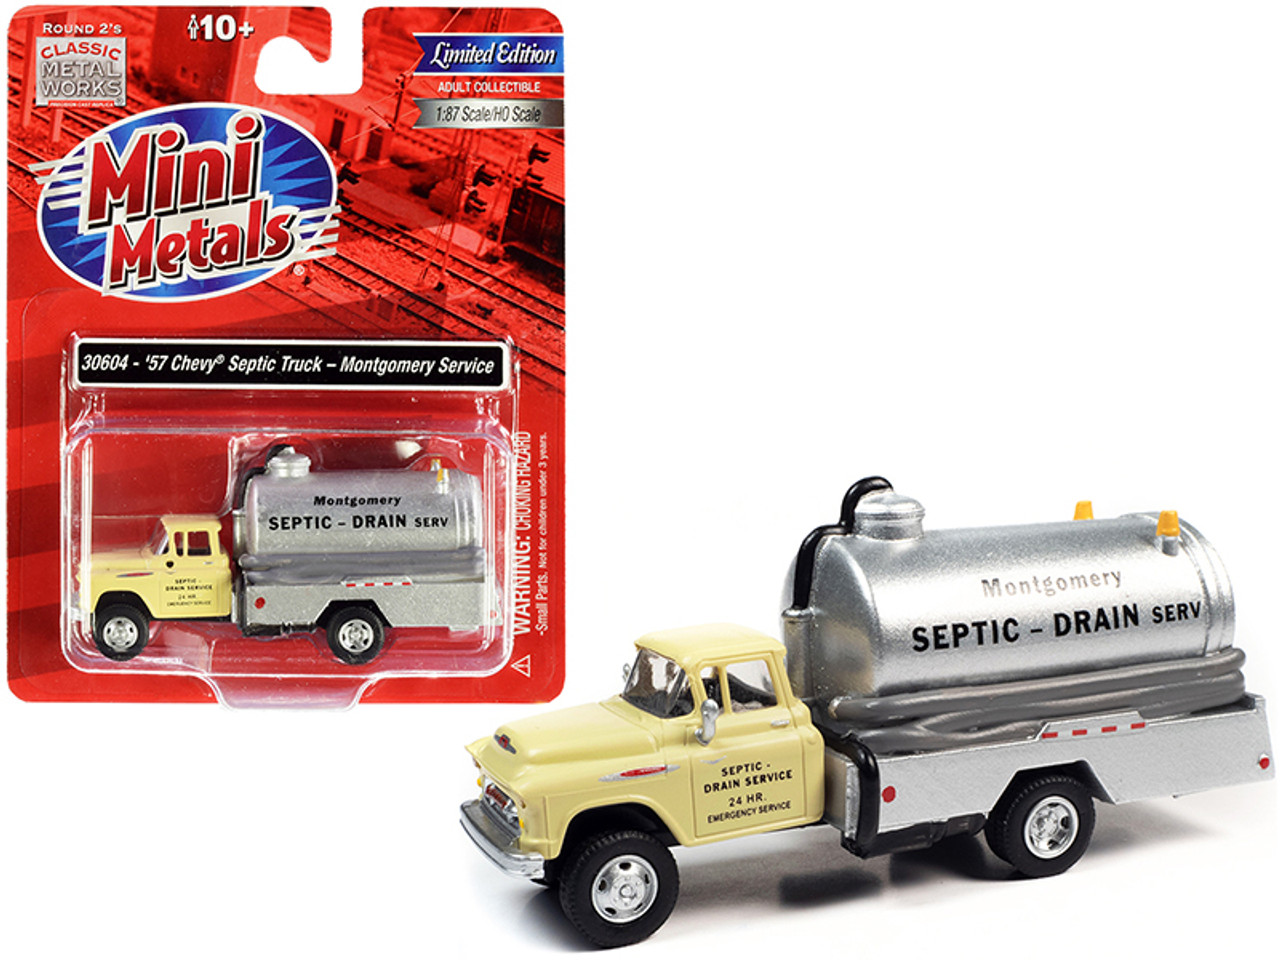 1957 Chevrolet Septic Tanker Truck "Montgomery Septic - Drain Service" Sand Beige and Silver 1/87 (HO) Scale Model by Classic Metal Works